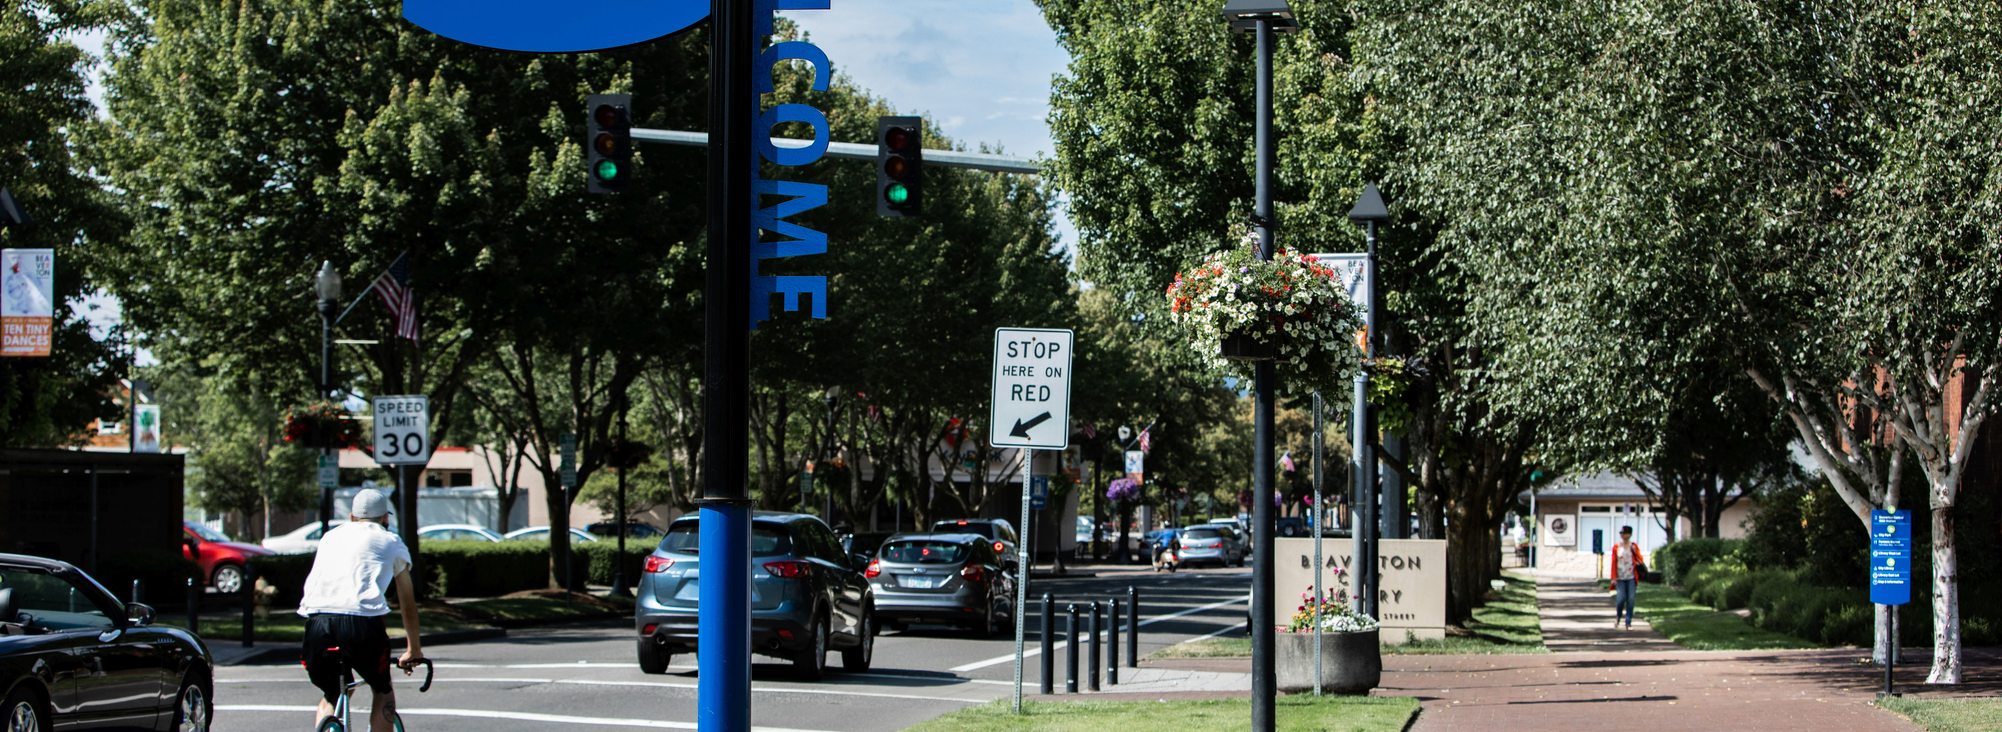 A street, bike lane, sidewalk and welcome sign indicating entry into downtown Beaverton. It is a mostly sunny day, and cars drive on the street. There is a single bike rider in the bike lane. Trees line the road.